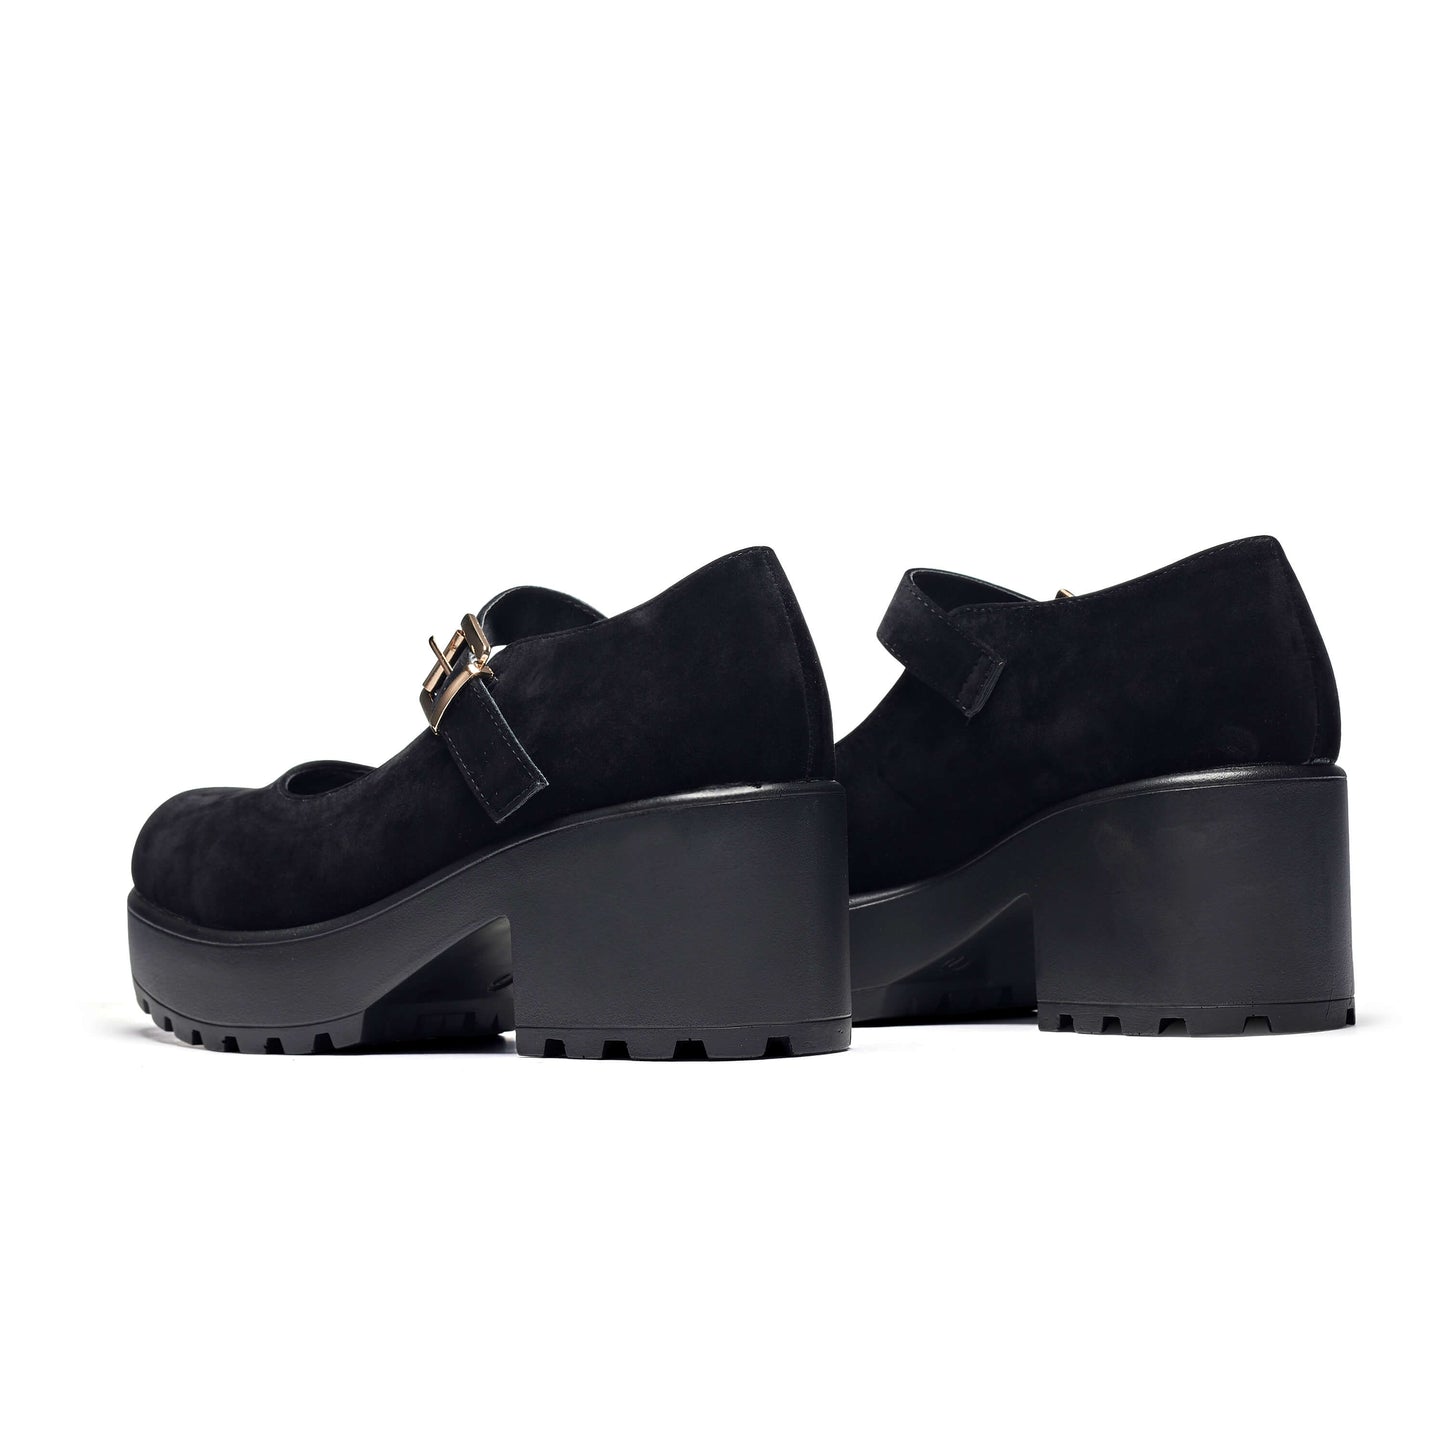 TIRA Black Mary Jane Shoes 'Suede Edition' - Mary Janes - KOI Footwear - Black Suede - Back View